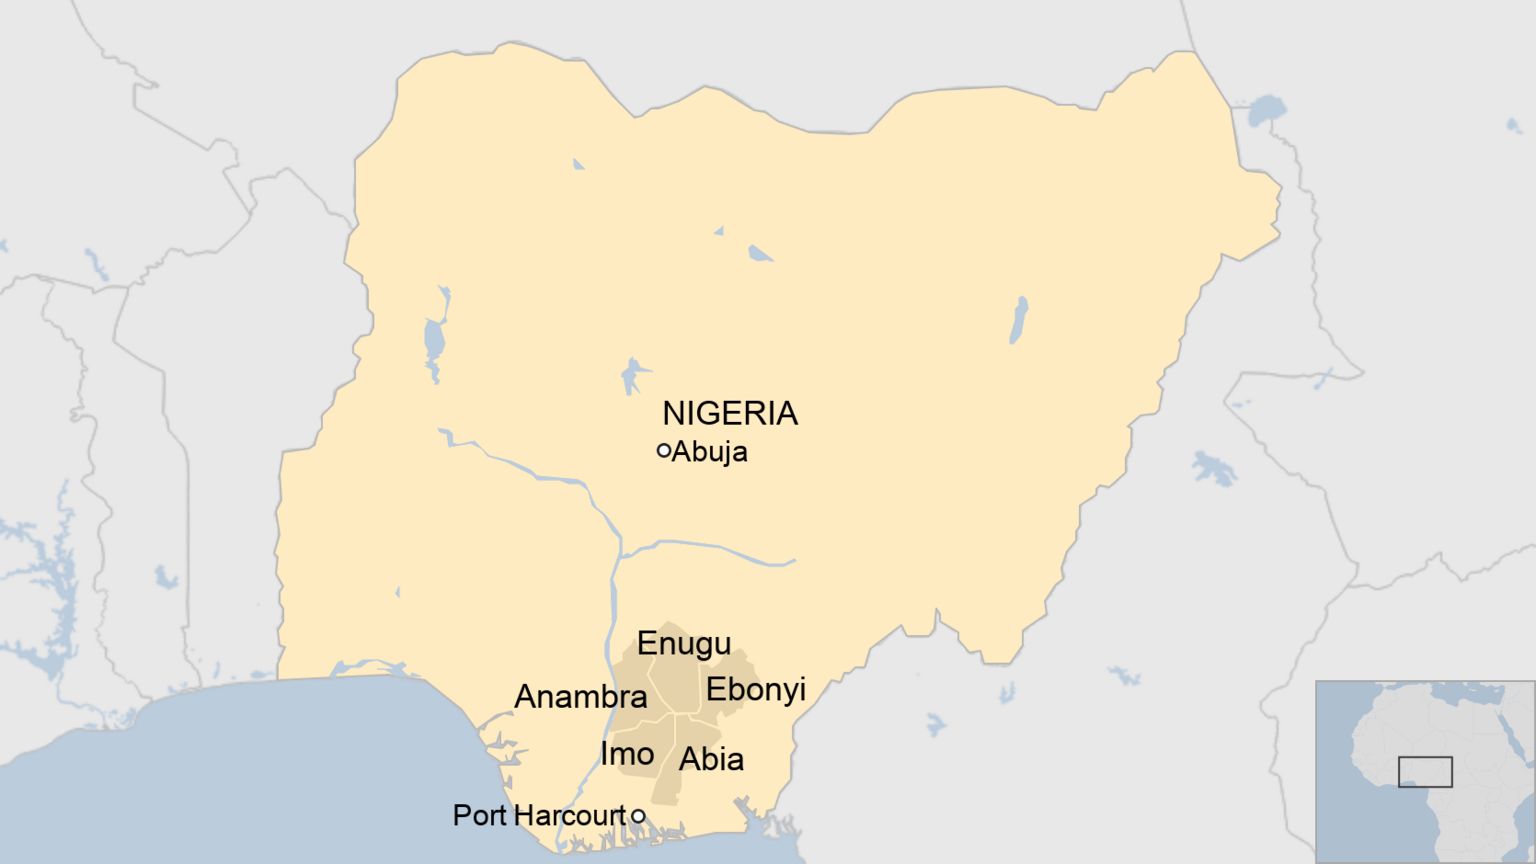 Map of Nigeria showing south-east